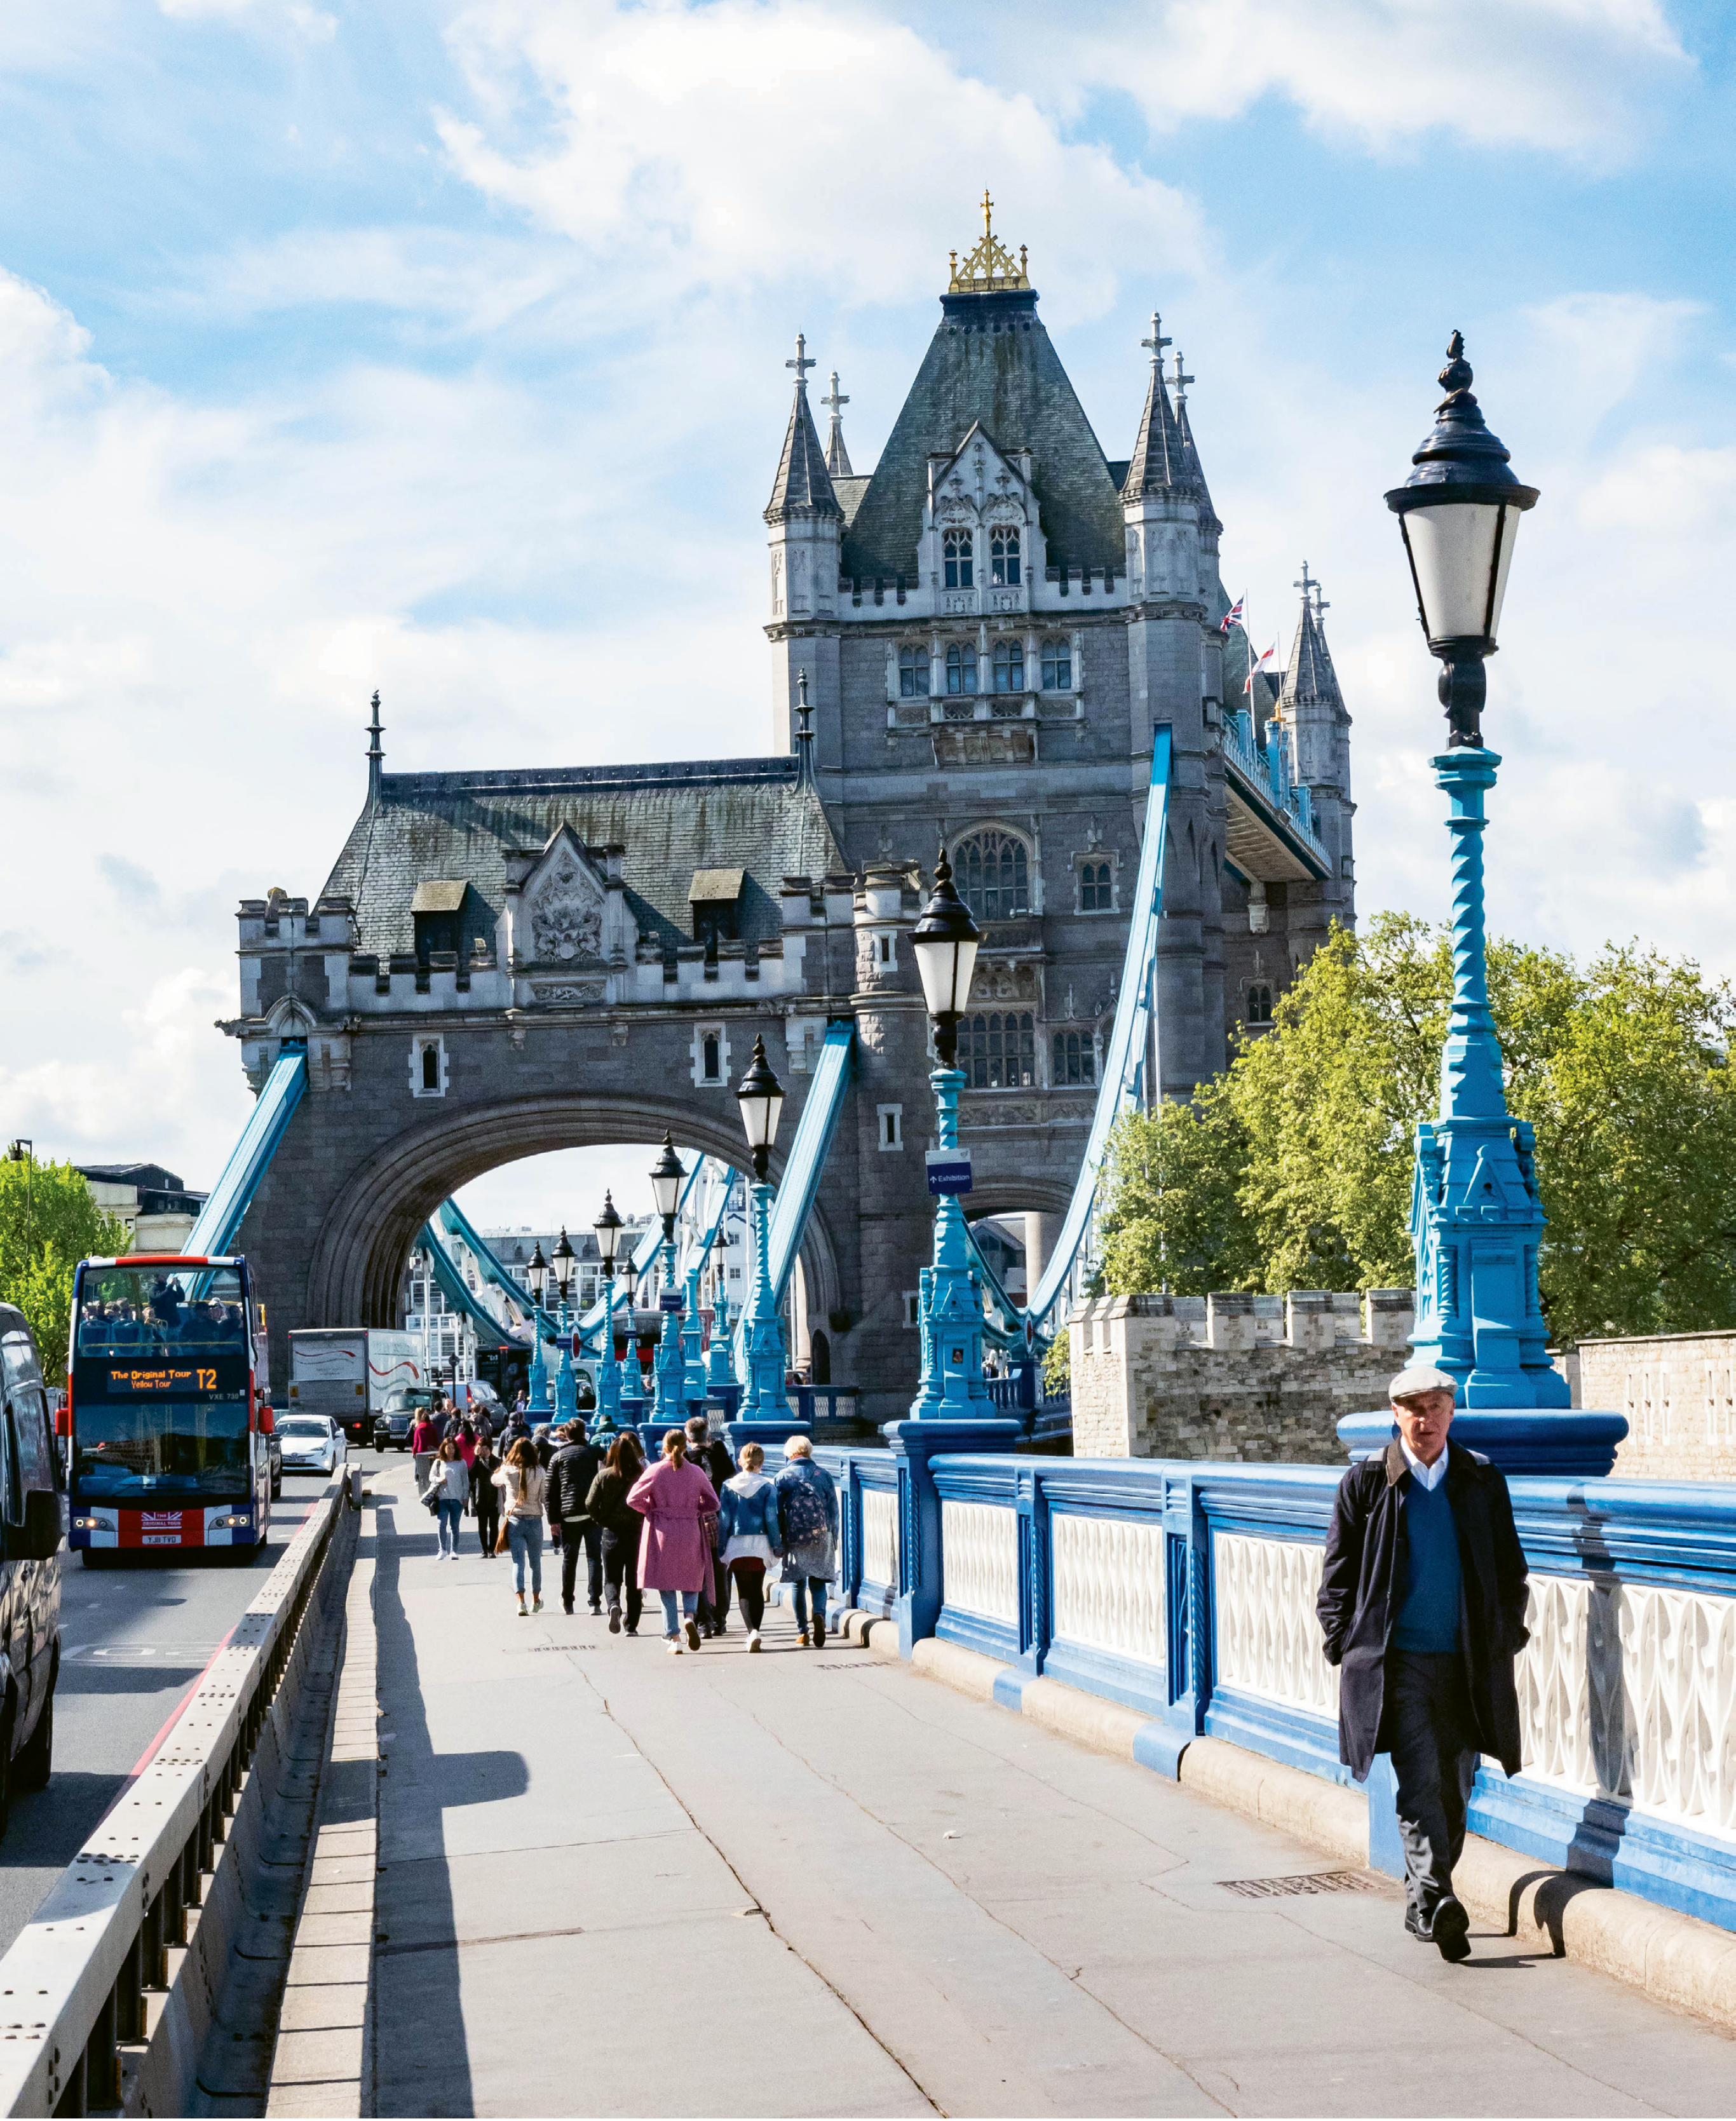 Walking the pedestrian path of the Tower Bridge, which spans the River Thames and is open for tours of the upper tier and engine room.